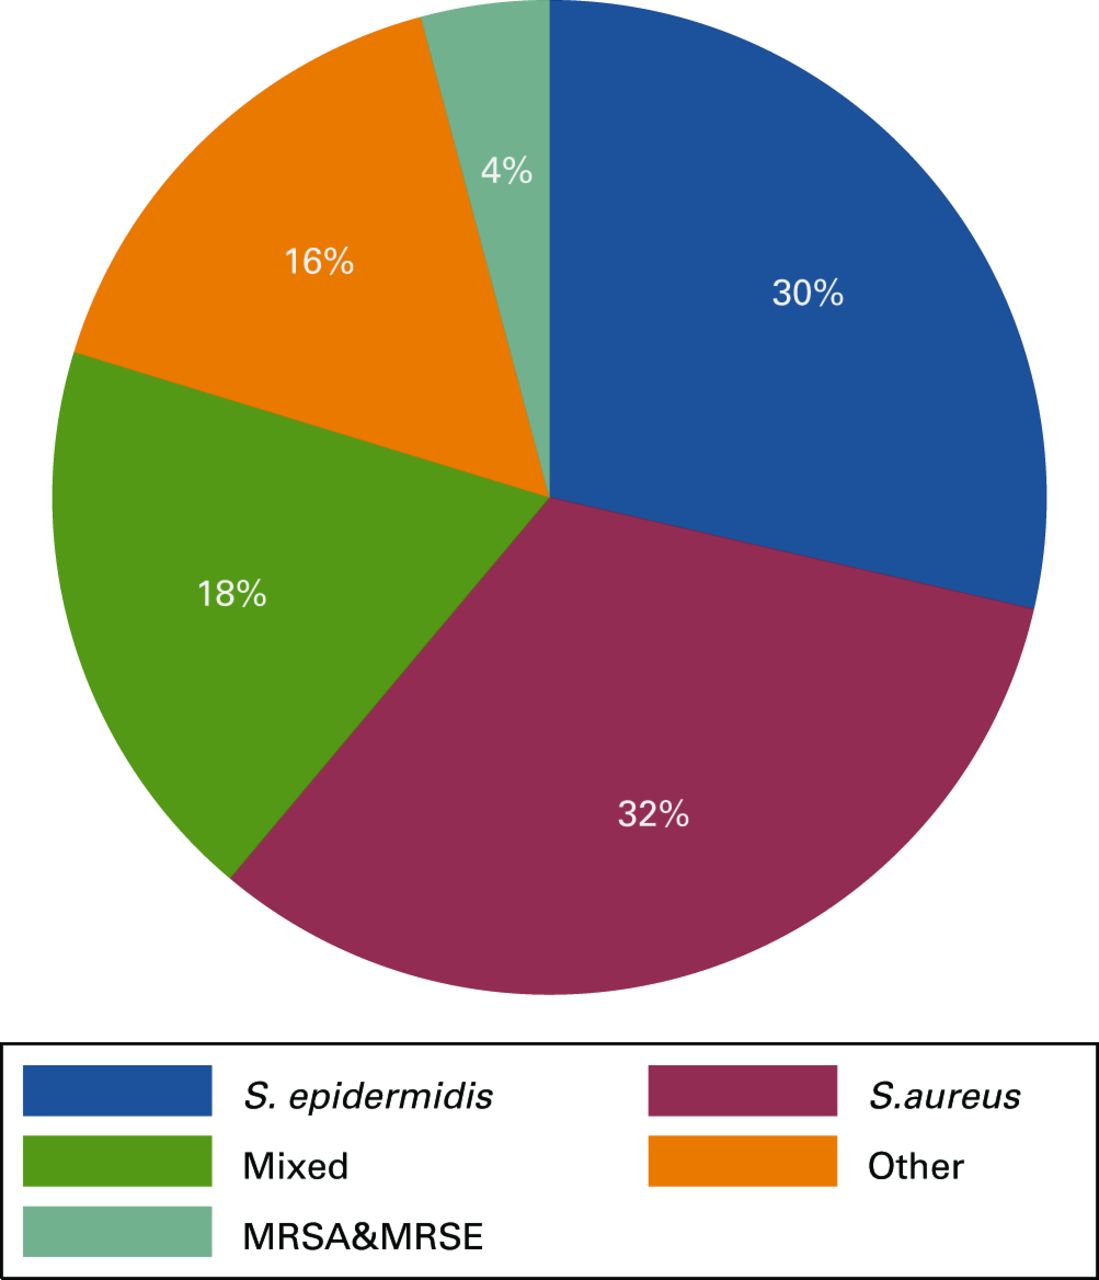 Fig. 1 
          Pie chart showing absolute and relative
frequencies of micro-organisms confirmed at revision surgery (S.
Epidermis - staphylococcus epidermidis; S. Aureus - staphylococcus
aureus; MRSA - methicillin-resistant staphylococcus
aureus; MRSE - methicillin-resistant staphylococcus
epidermidis; pts - patients).
        